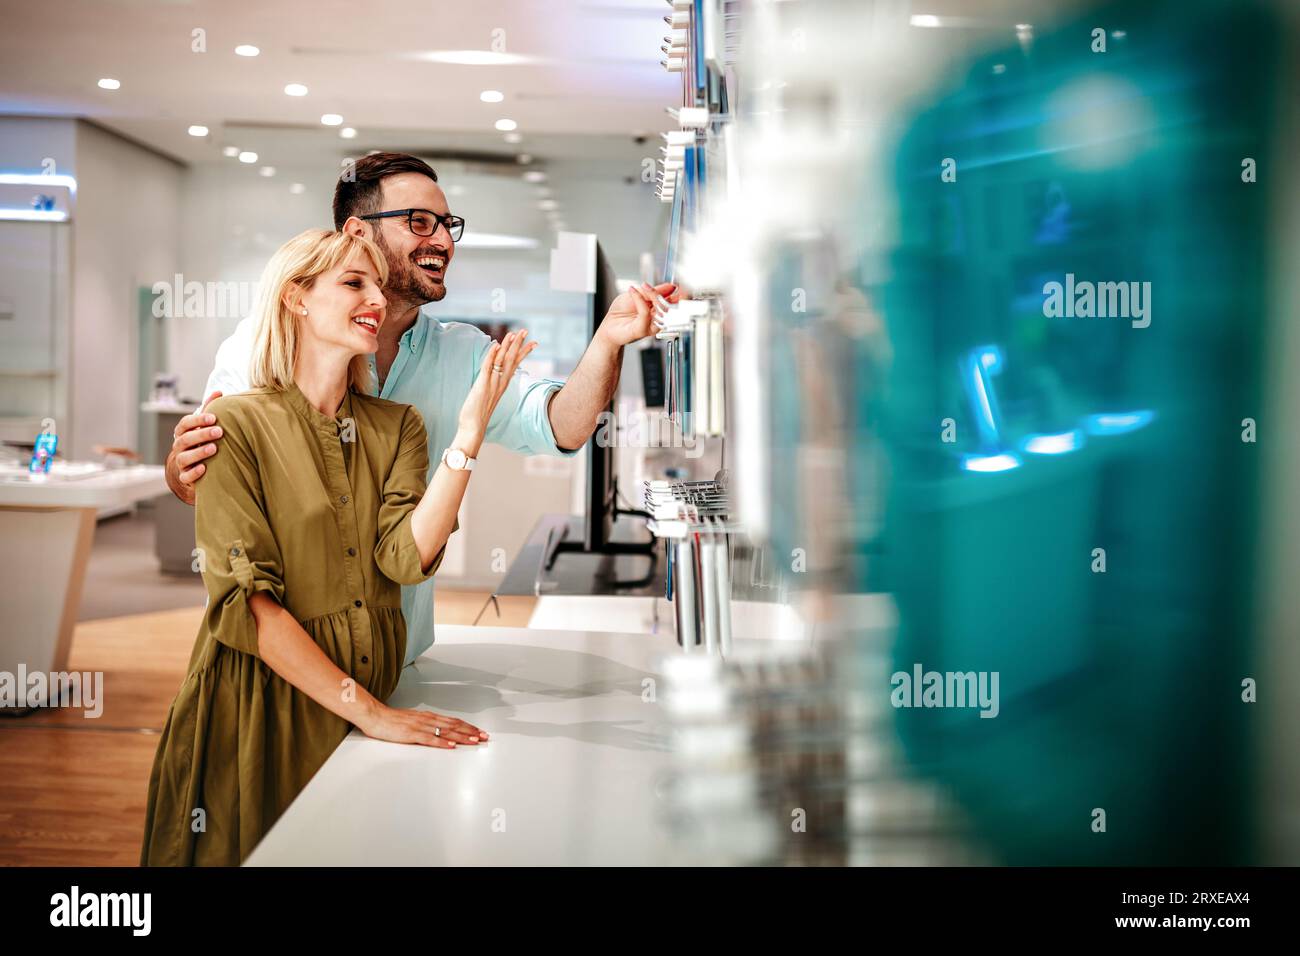 Shopping a new digital device. Happy couple buying a smartphone in store. Stock Photo